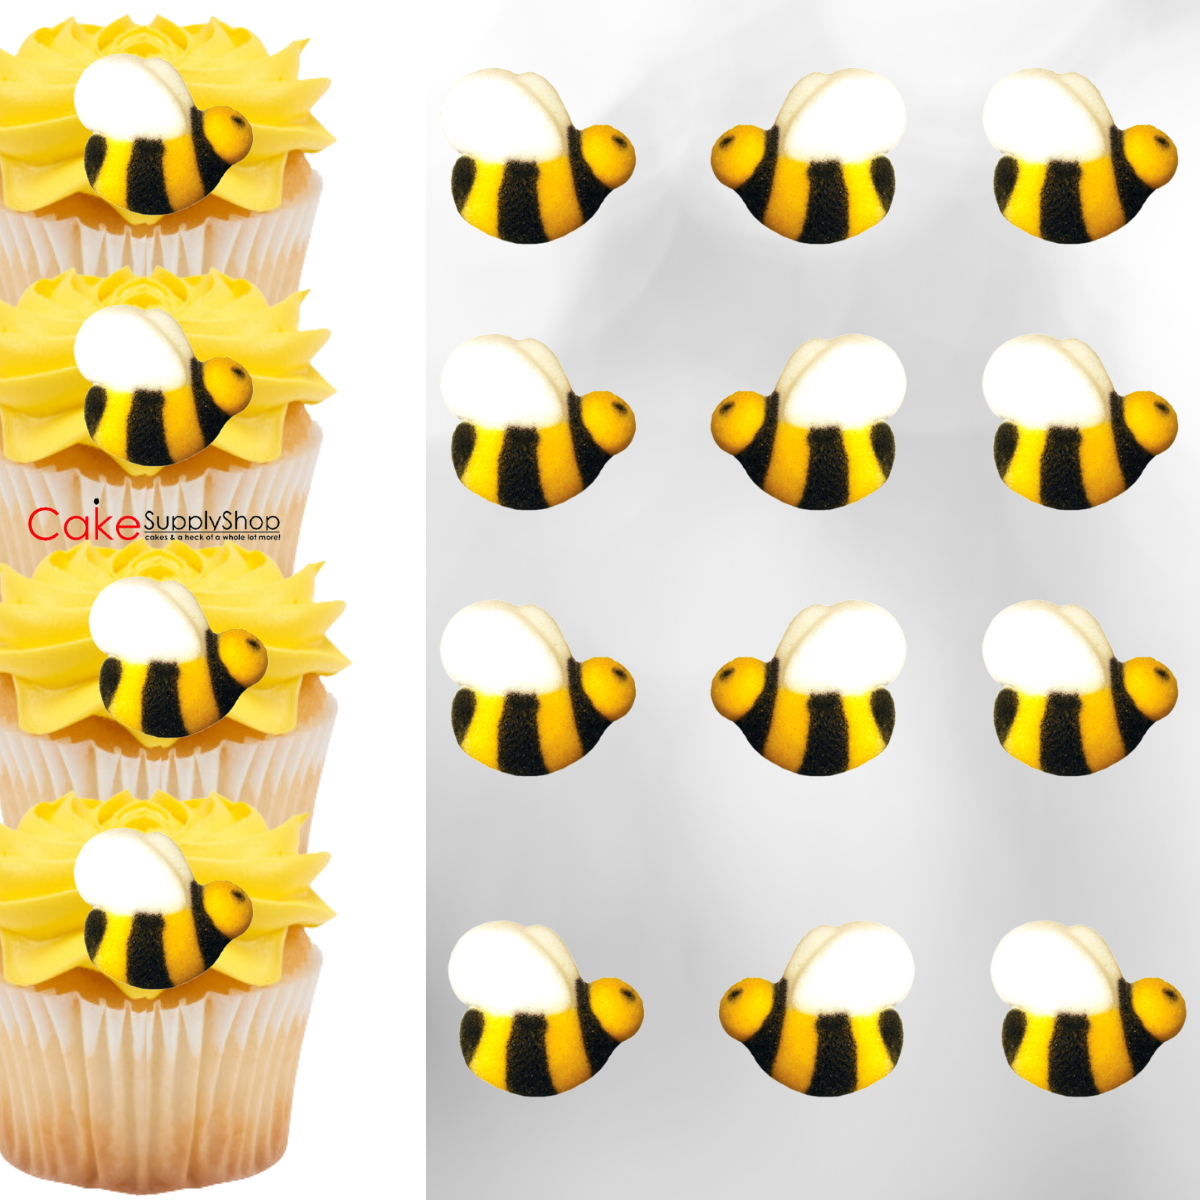 Bumble Bee Paper Cutouts 3D Bumble Bee Decor Bee Decor Theme Honey Bee  Cutouts Paper Bees Black and Yellow Bee Paper Cutouts 